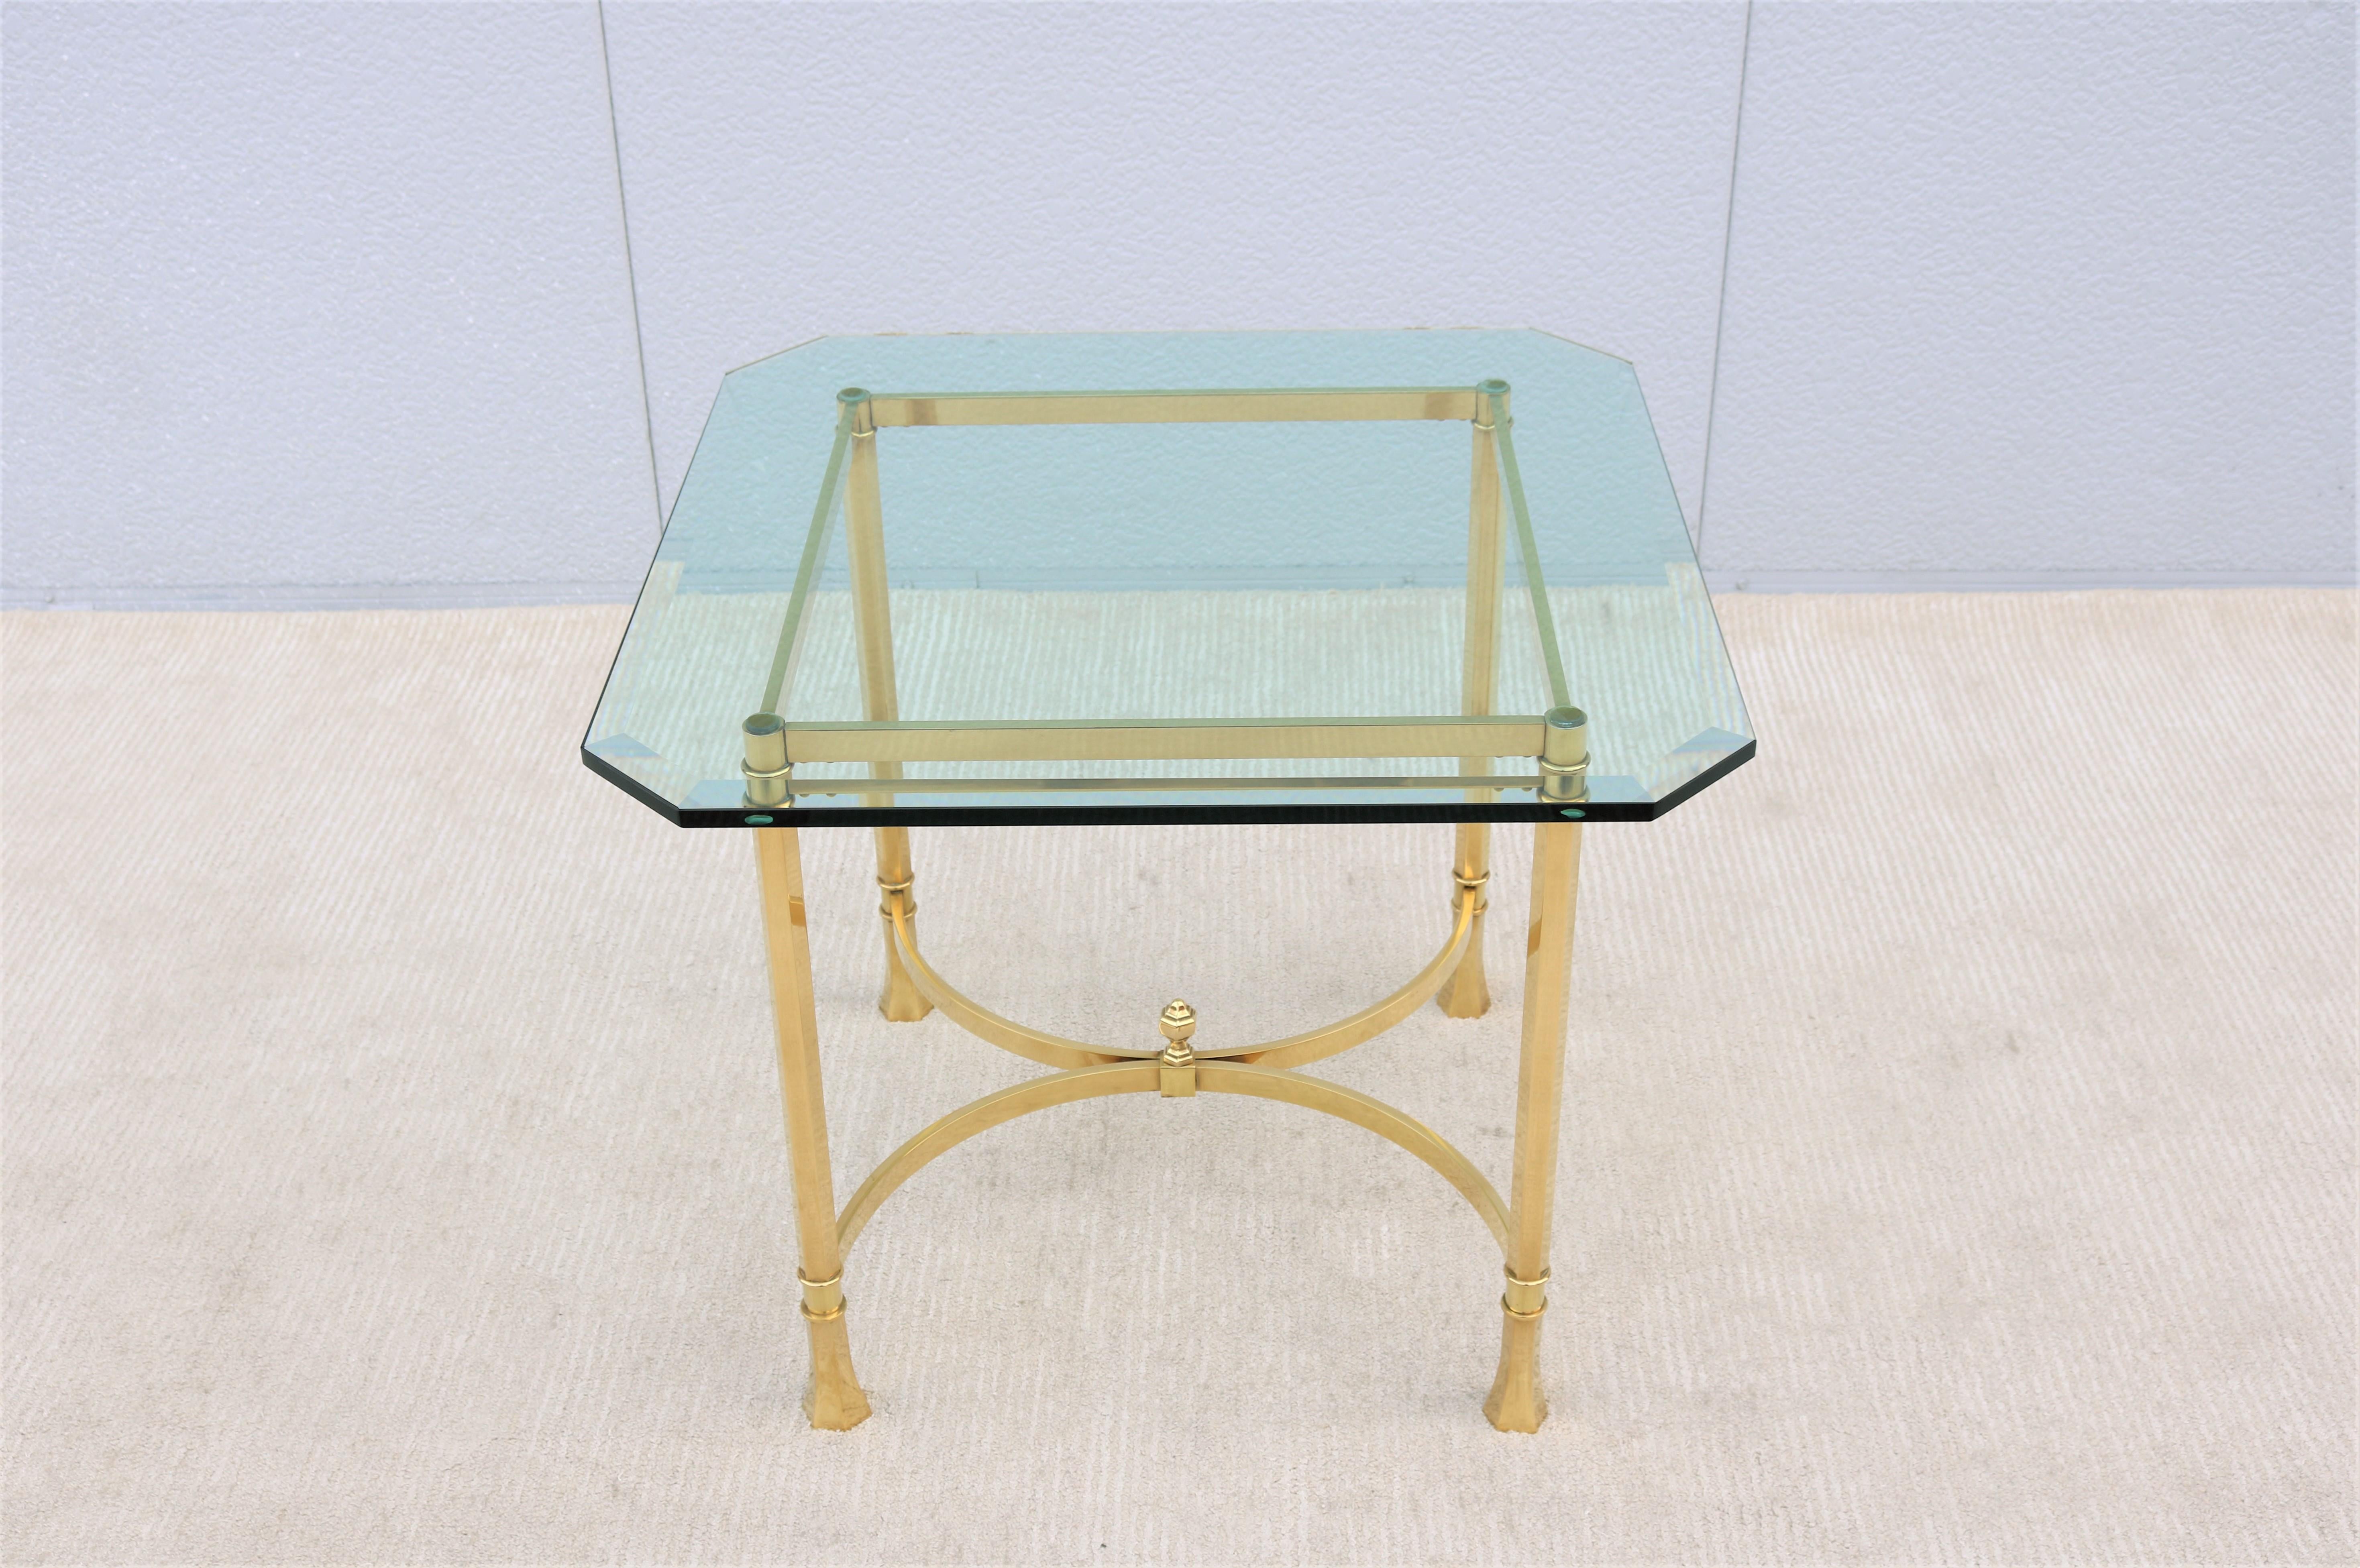 Stunning and elegant Maison Bagues style brass and glass square side table.
Features brass hexagon-shaped legs and a cross stretcher with a center ball finial.
The glass top features a classy and artistic polished beveled edge style, with deep